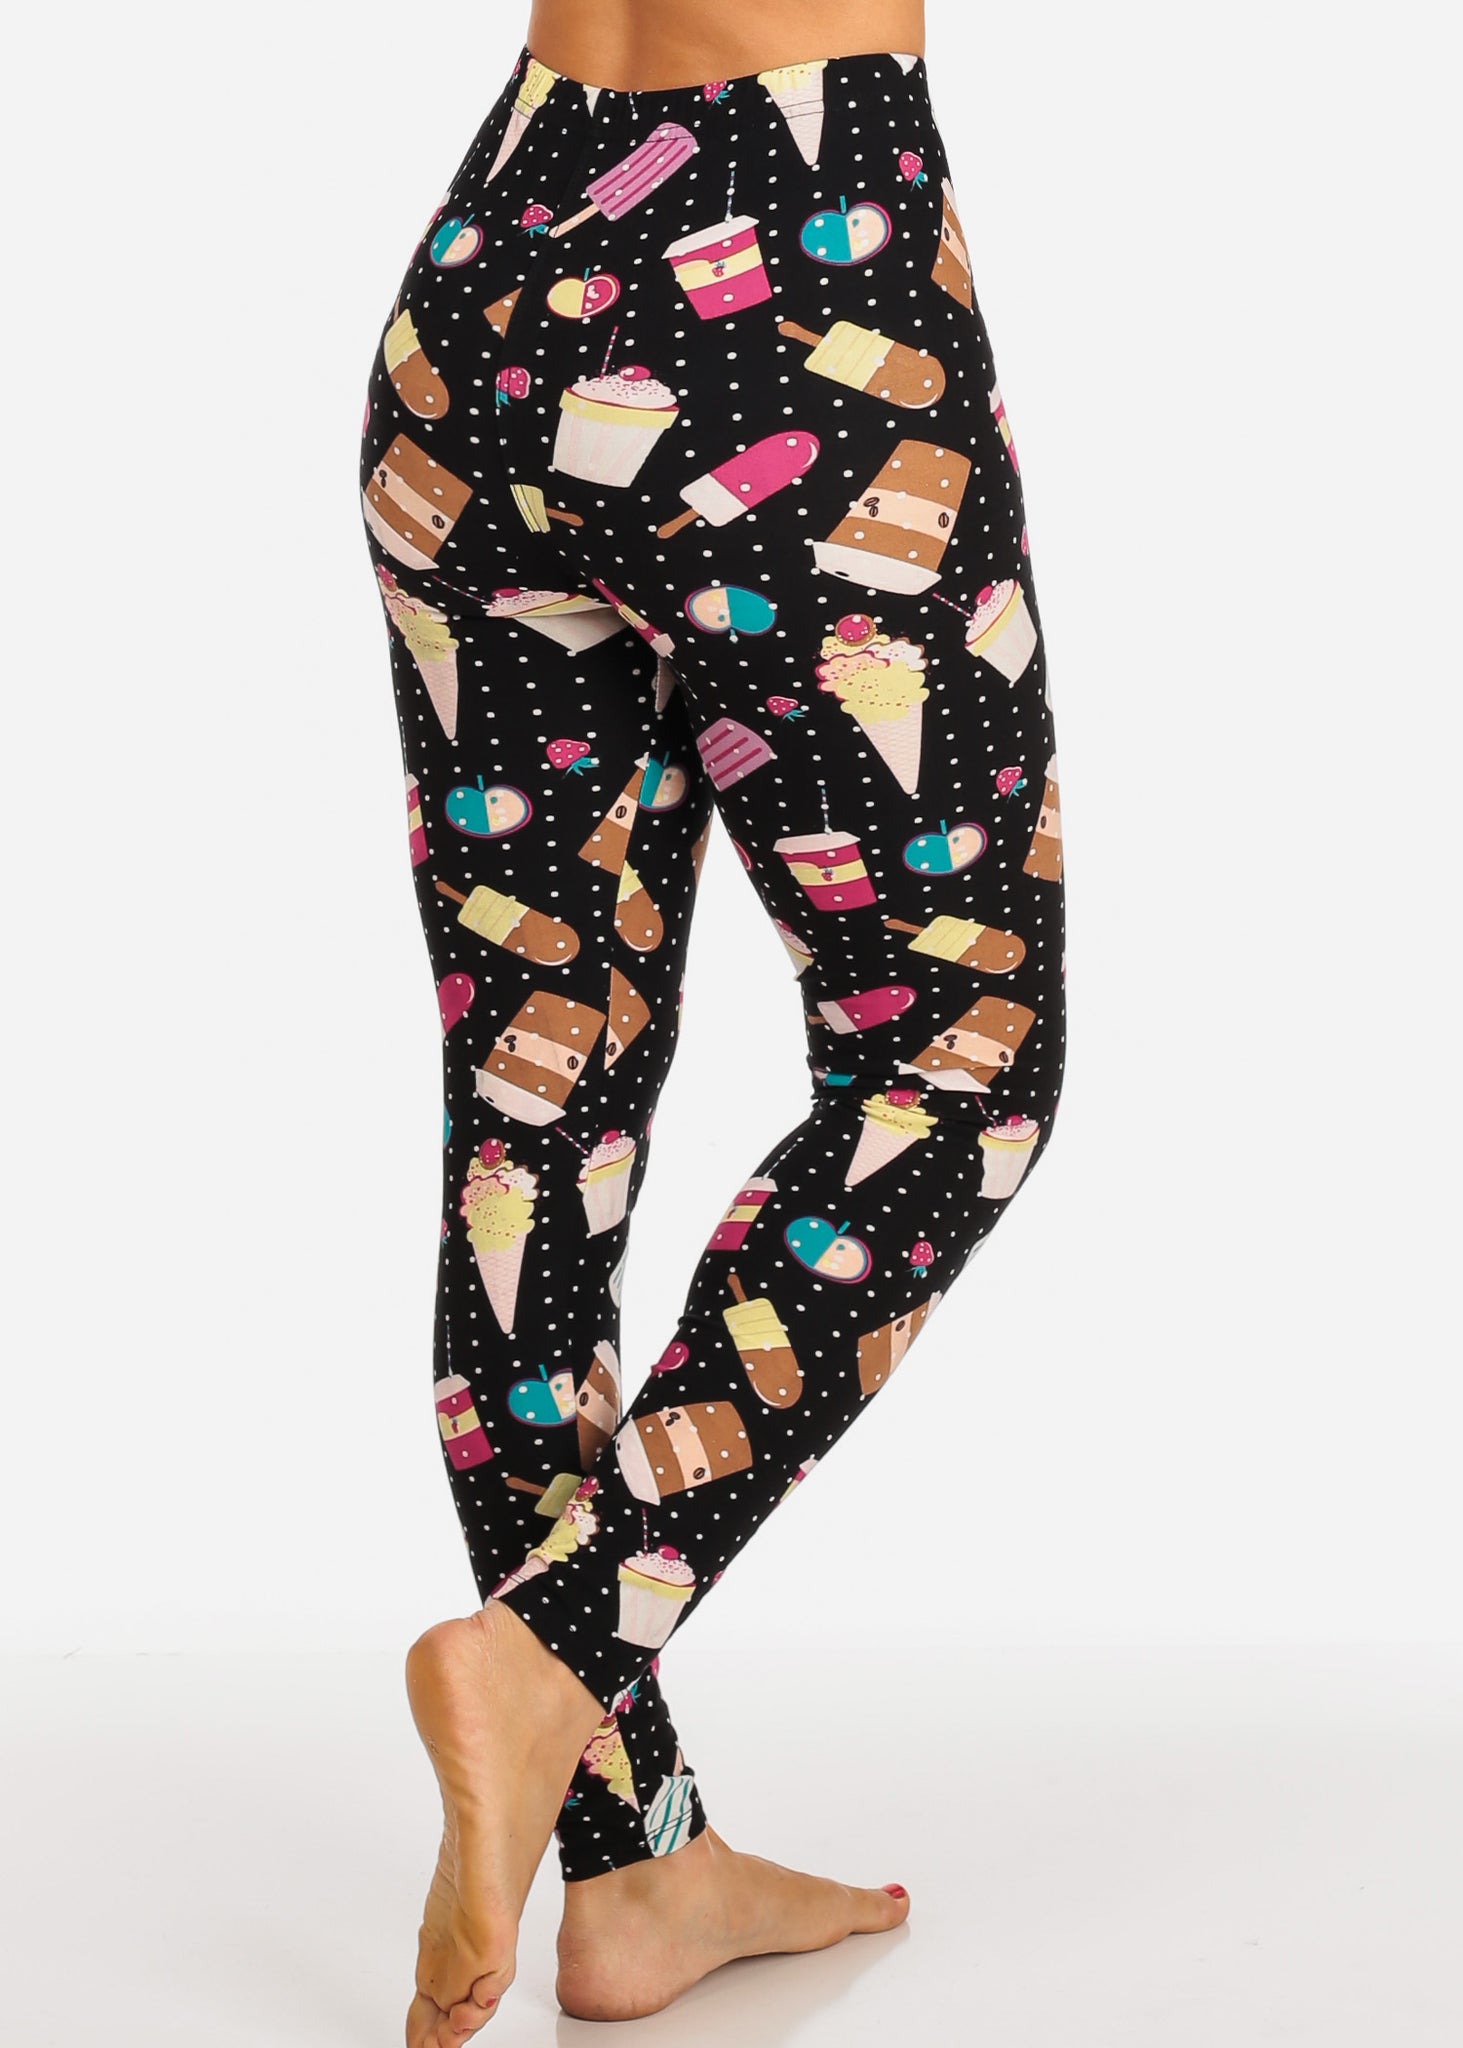 Punch - Ice Cream | STRONGER | Tops for leggings, Tights, Clothes for women